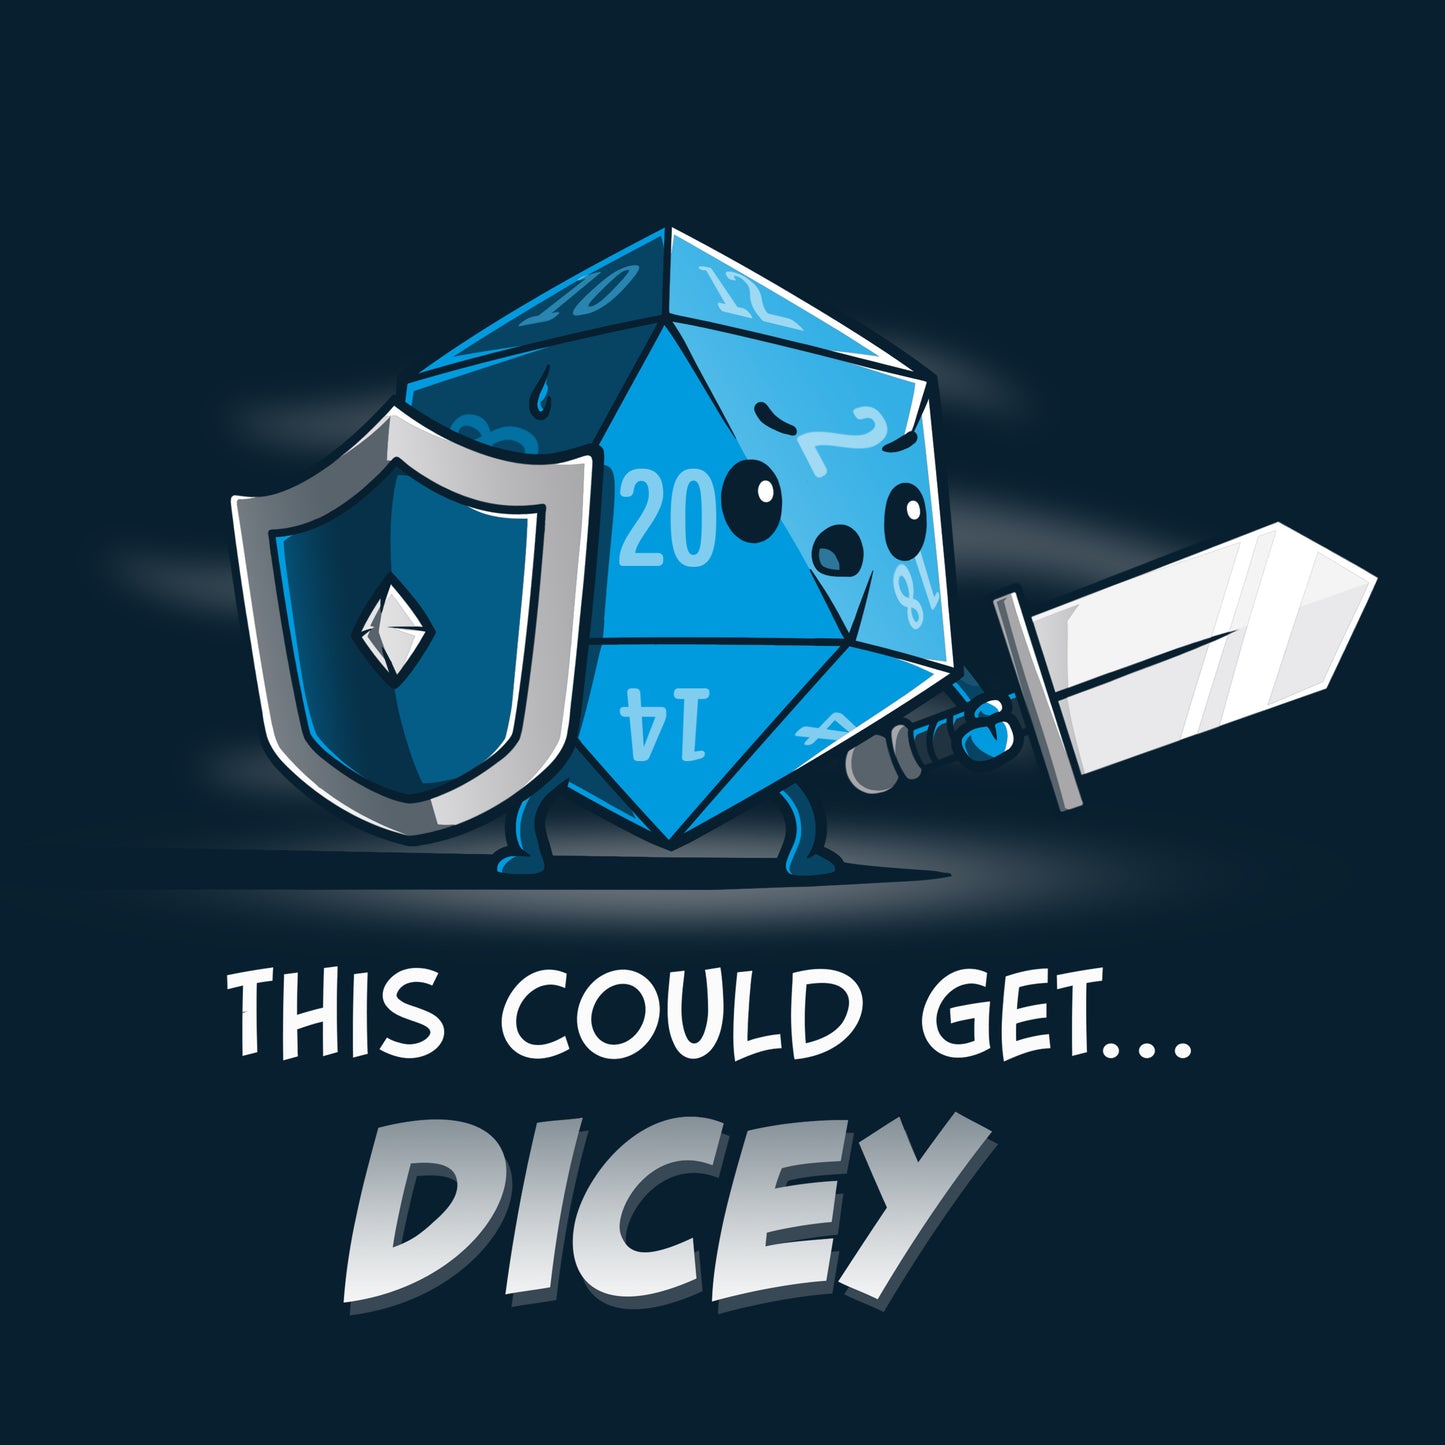 TeeTurtle's product "This Could Get Dicey" could make game night more exciting.